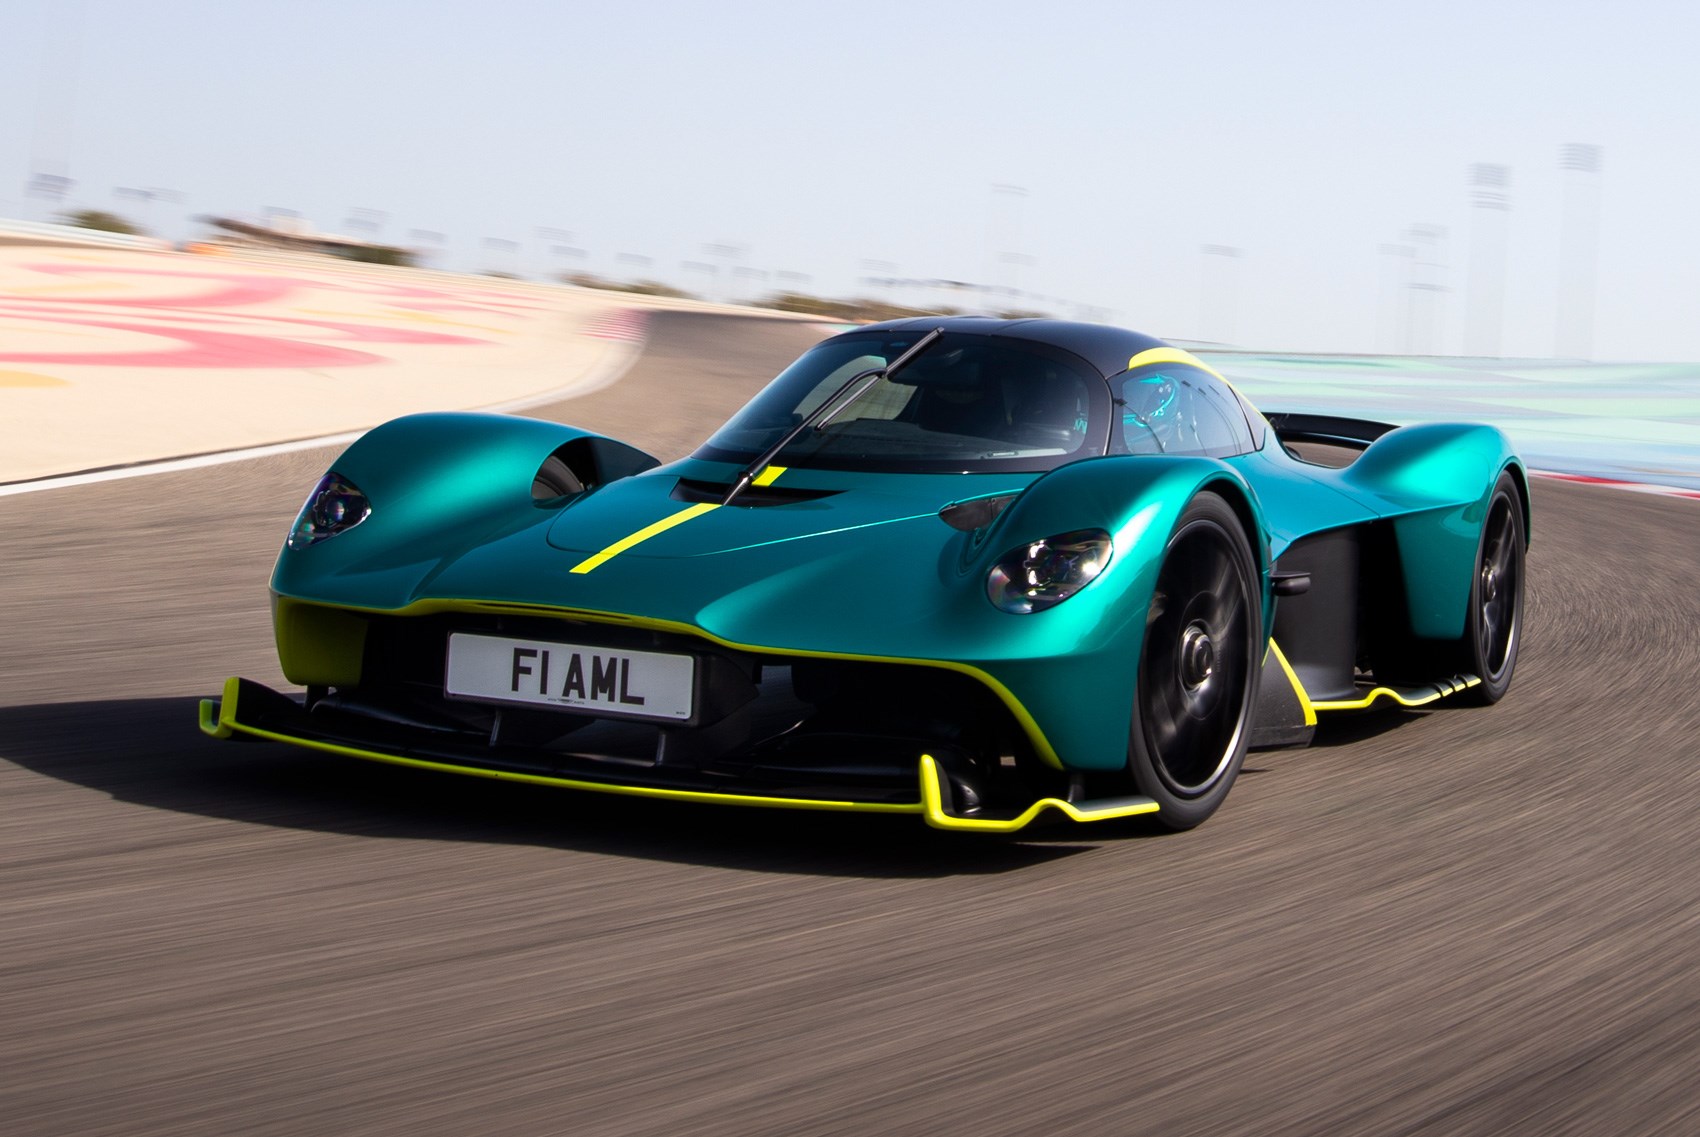 The new Aston Martin Valkyrie is so fast it will actually blow